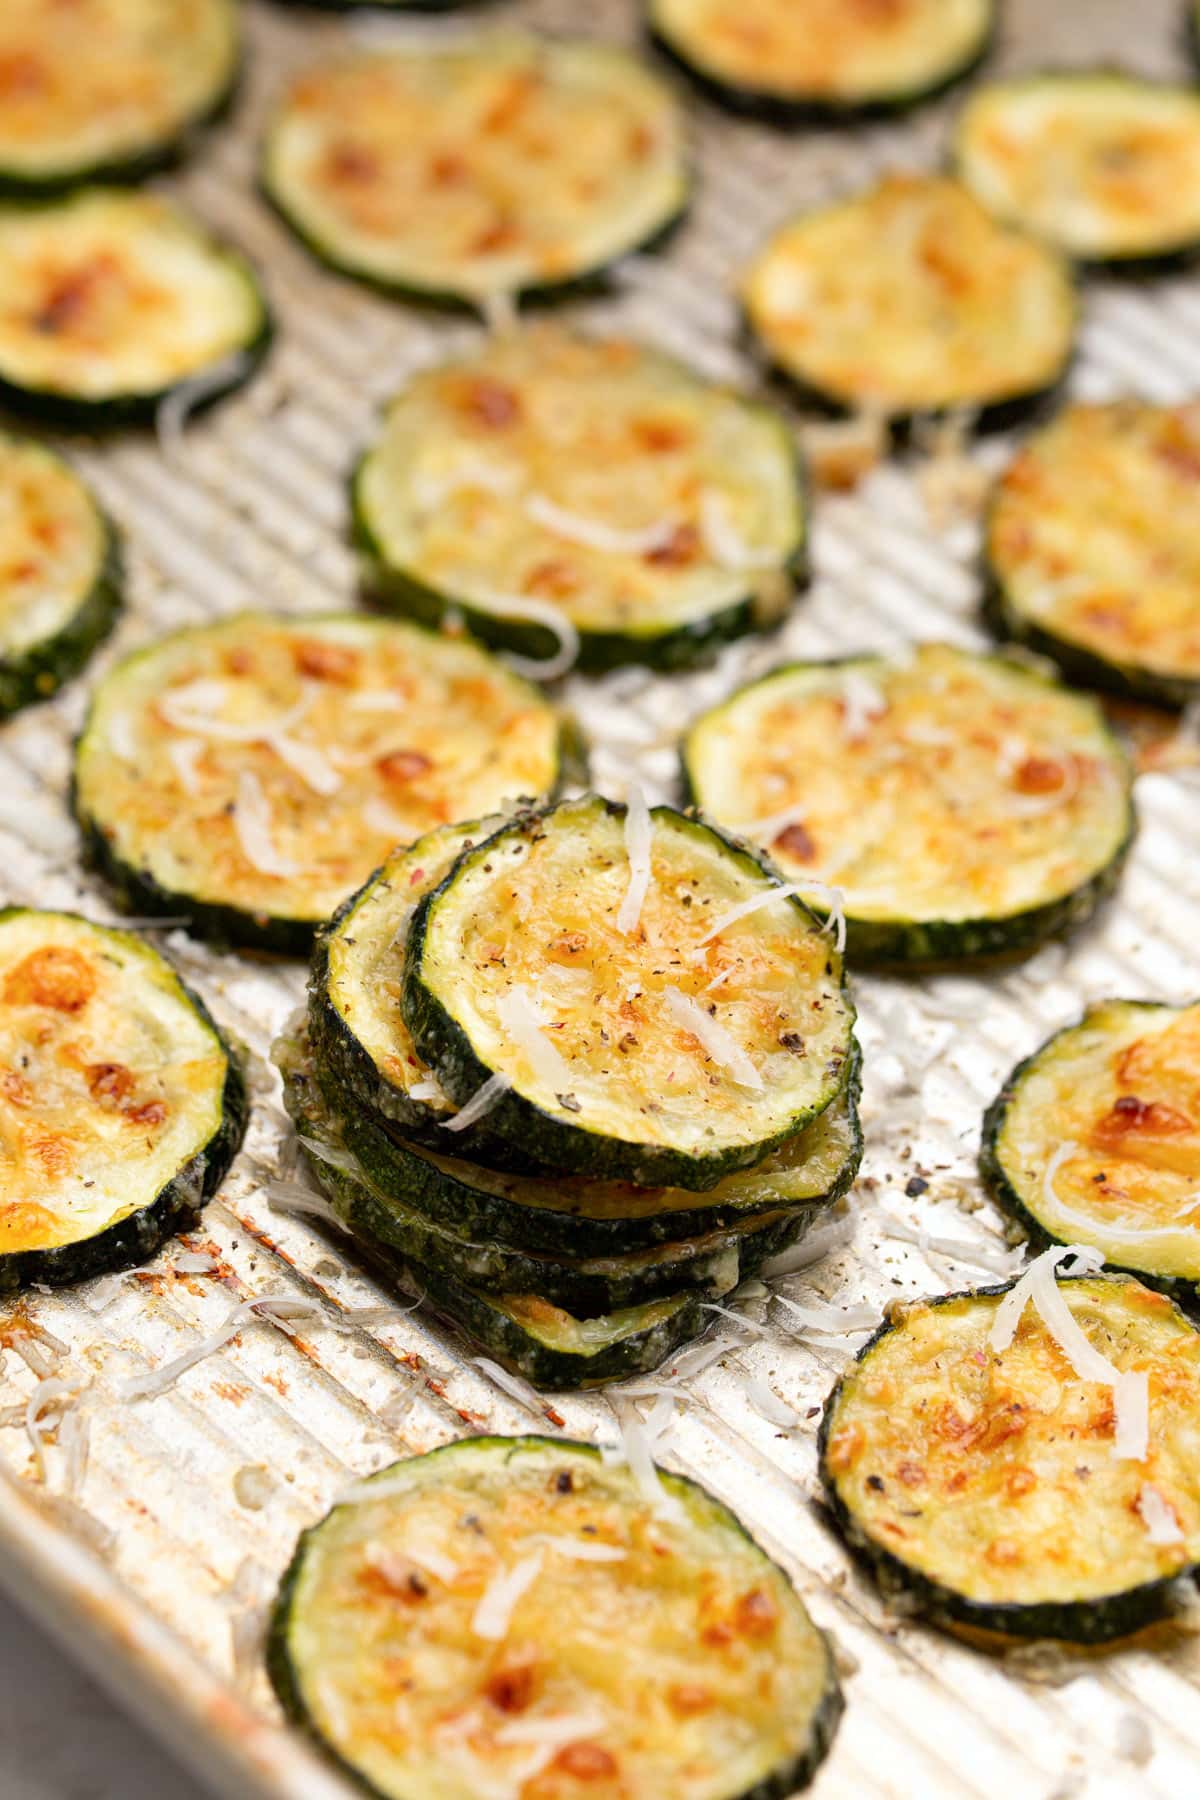 Roasted Parmesan zucchini on a ribbed baking sheet topped with freshly grated Parmesan cheese.